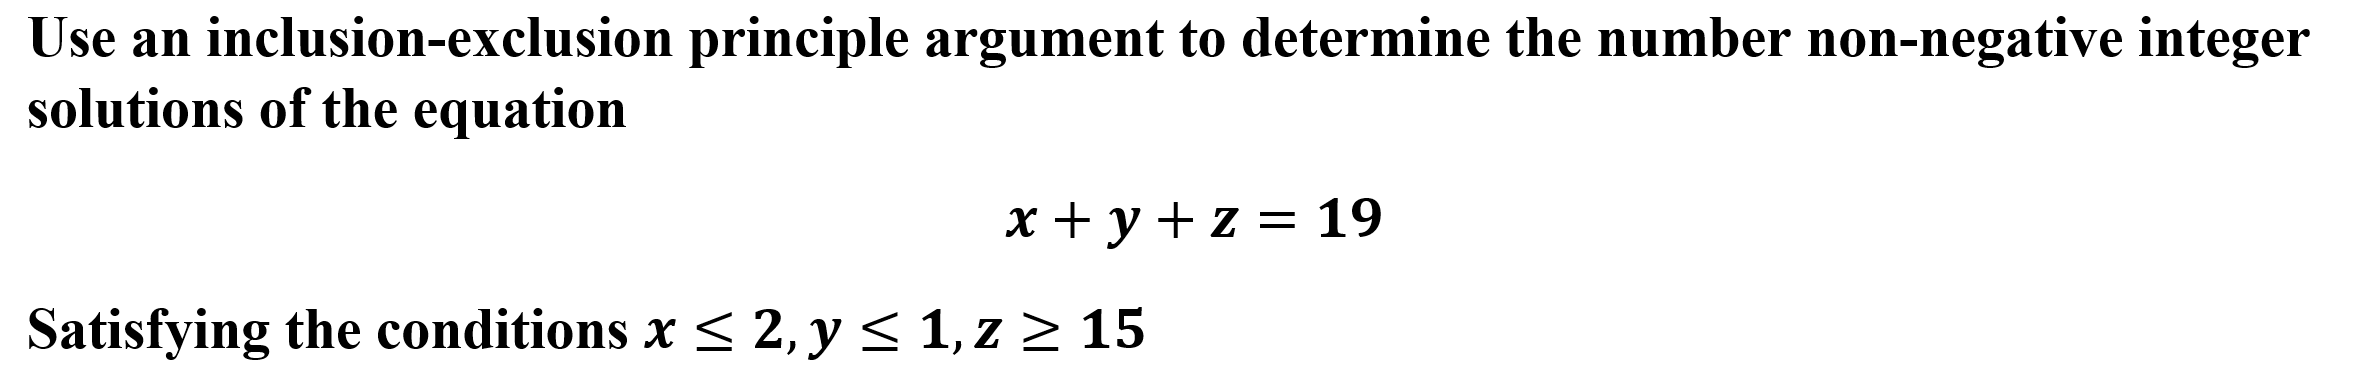 Use an inclusion-exclusion principle argument to determine the number non-negative integer
solutions of the equation
x + y + z = 19
Satisfying the conditions x < 2, y < 1, z > 15
